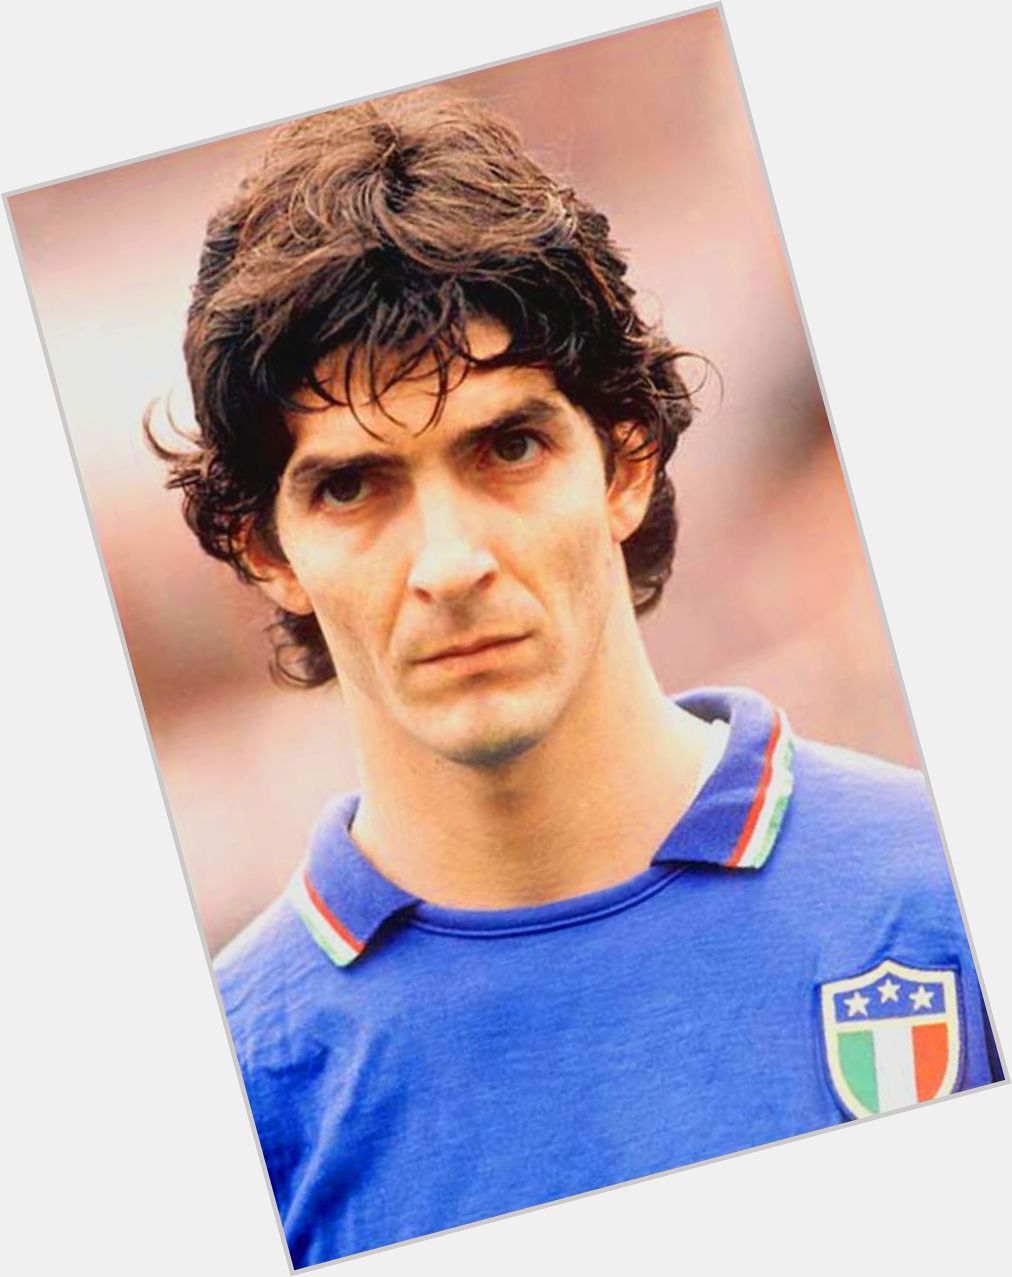 <a href="/hot-men/paolo-rossi/where-dating-news-photos">Paolo Rossi</a> Athletic body,  dark brown hair & hairstyles